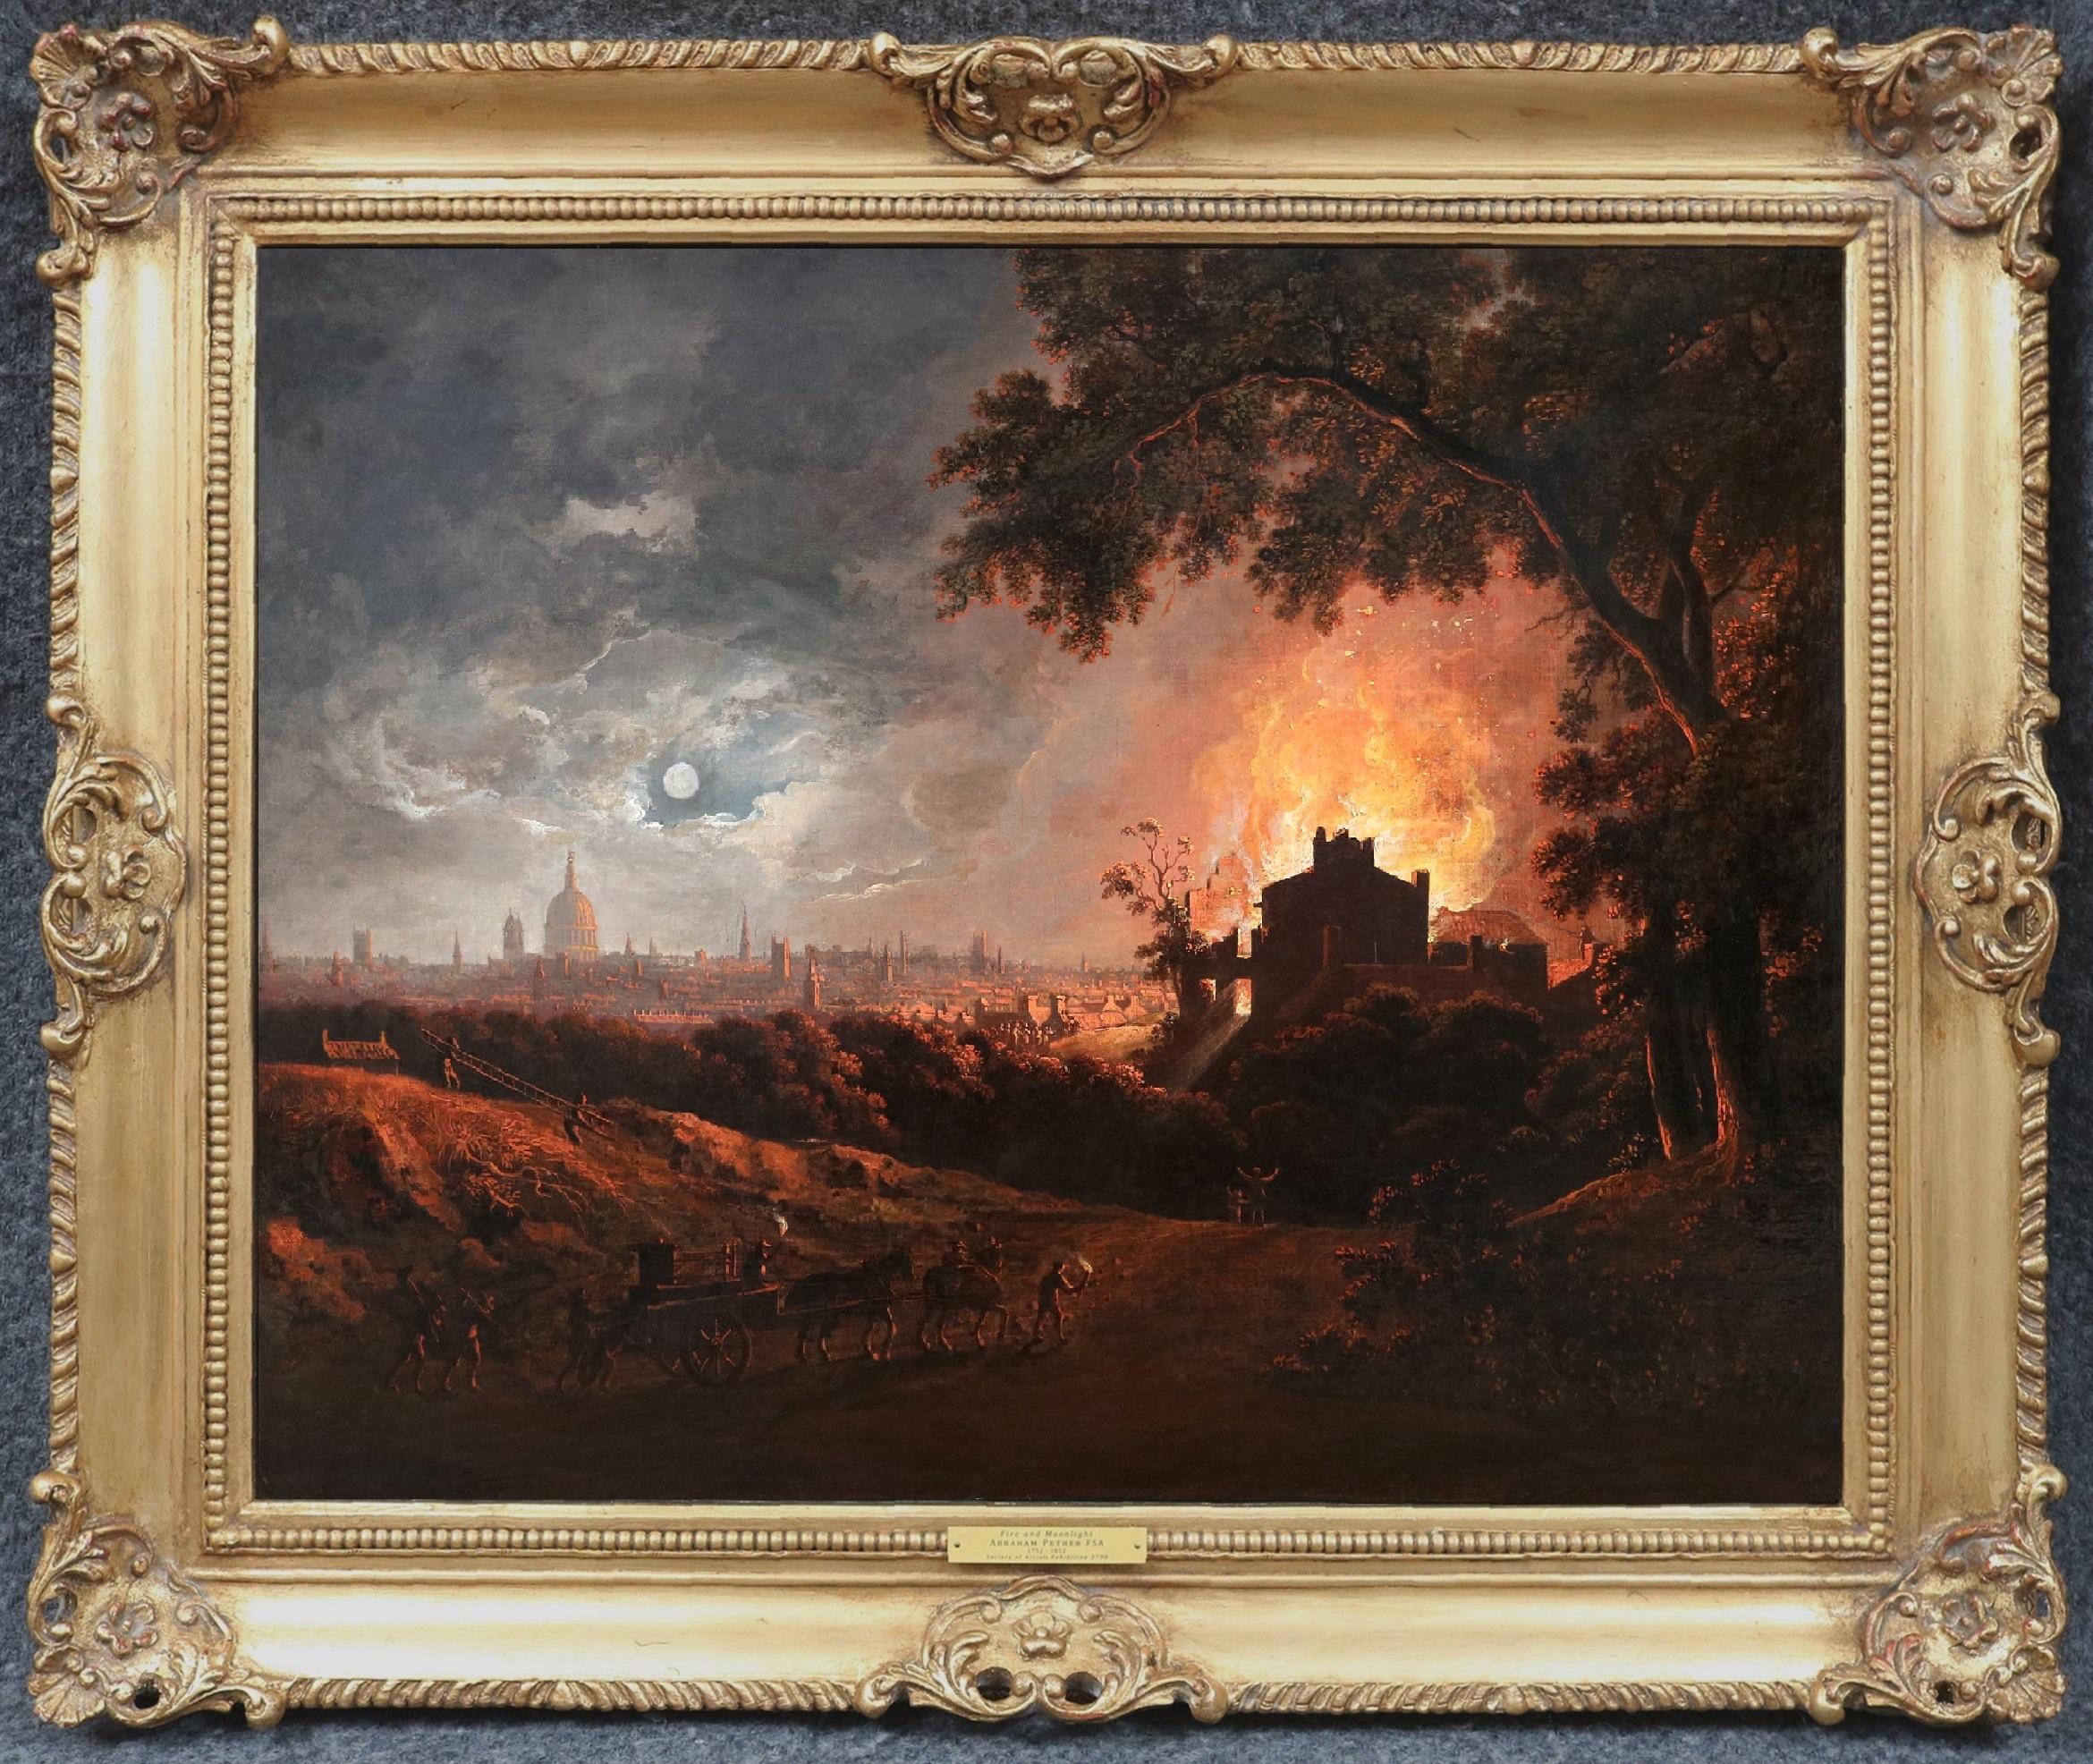 ‘Fire and Moonlight’ by Abraham Pether FSA (1752–1812).

The painting – which depicts an extensive moonlit view across the City of London with a cottage on fire in the foreground – was exhibited at the Society of Artists Exhibition in London in 1790